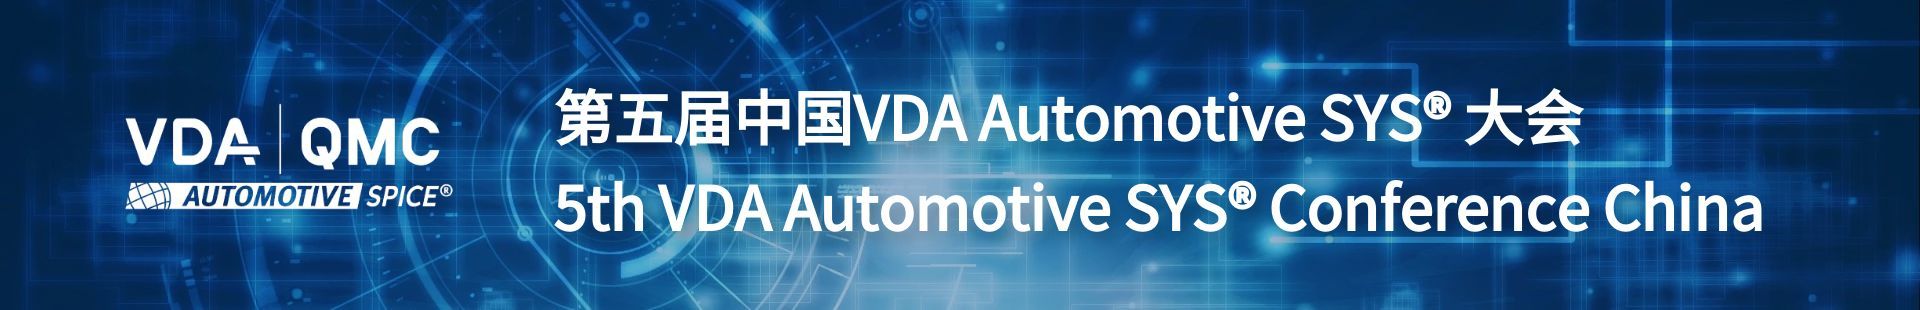 5th VDA Automotive SYS® Conference China